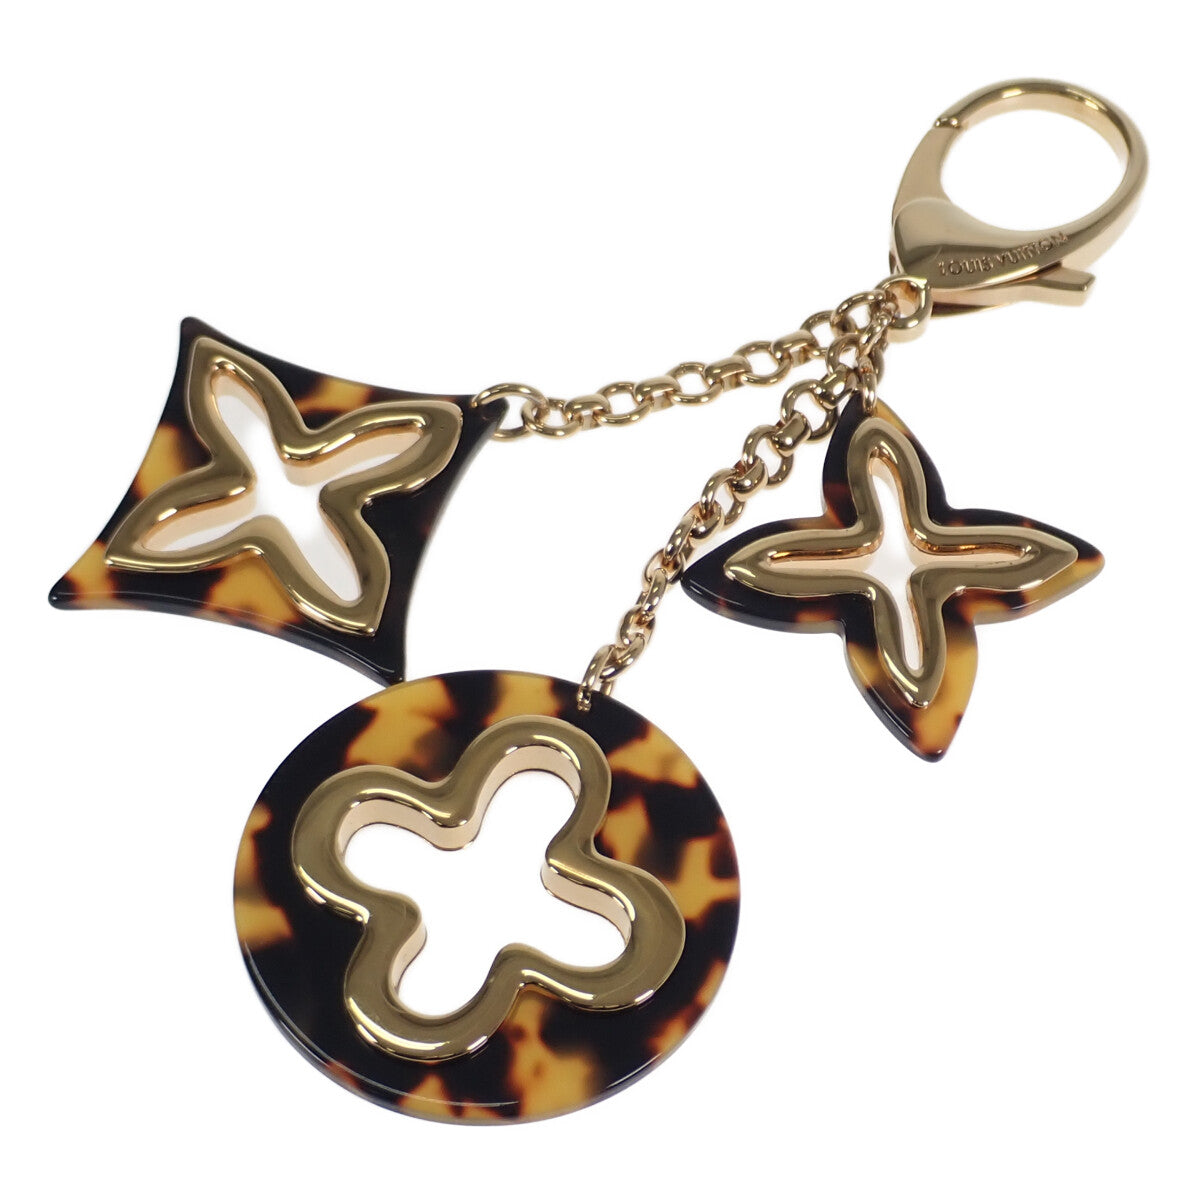 Louis Vuitton Insolence Bag Charm Metal Key Chain M65087 in Excellent condition